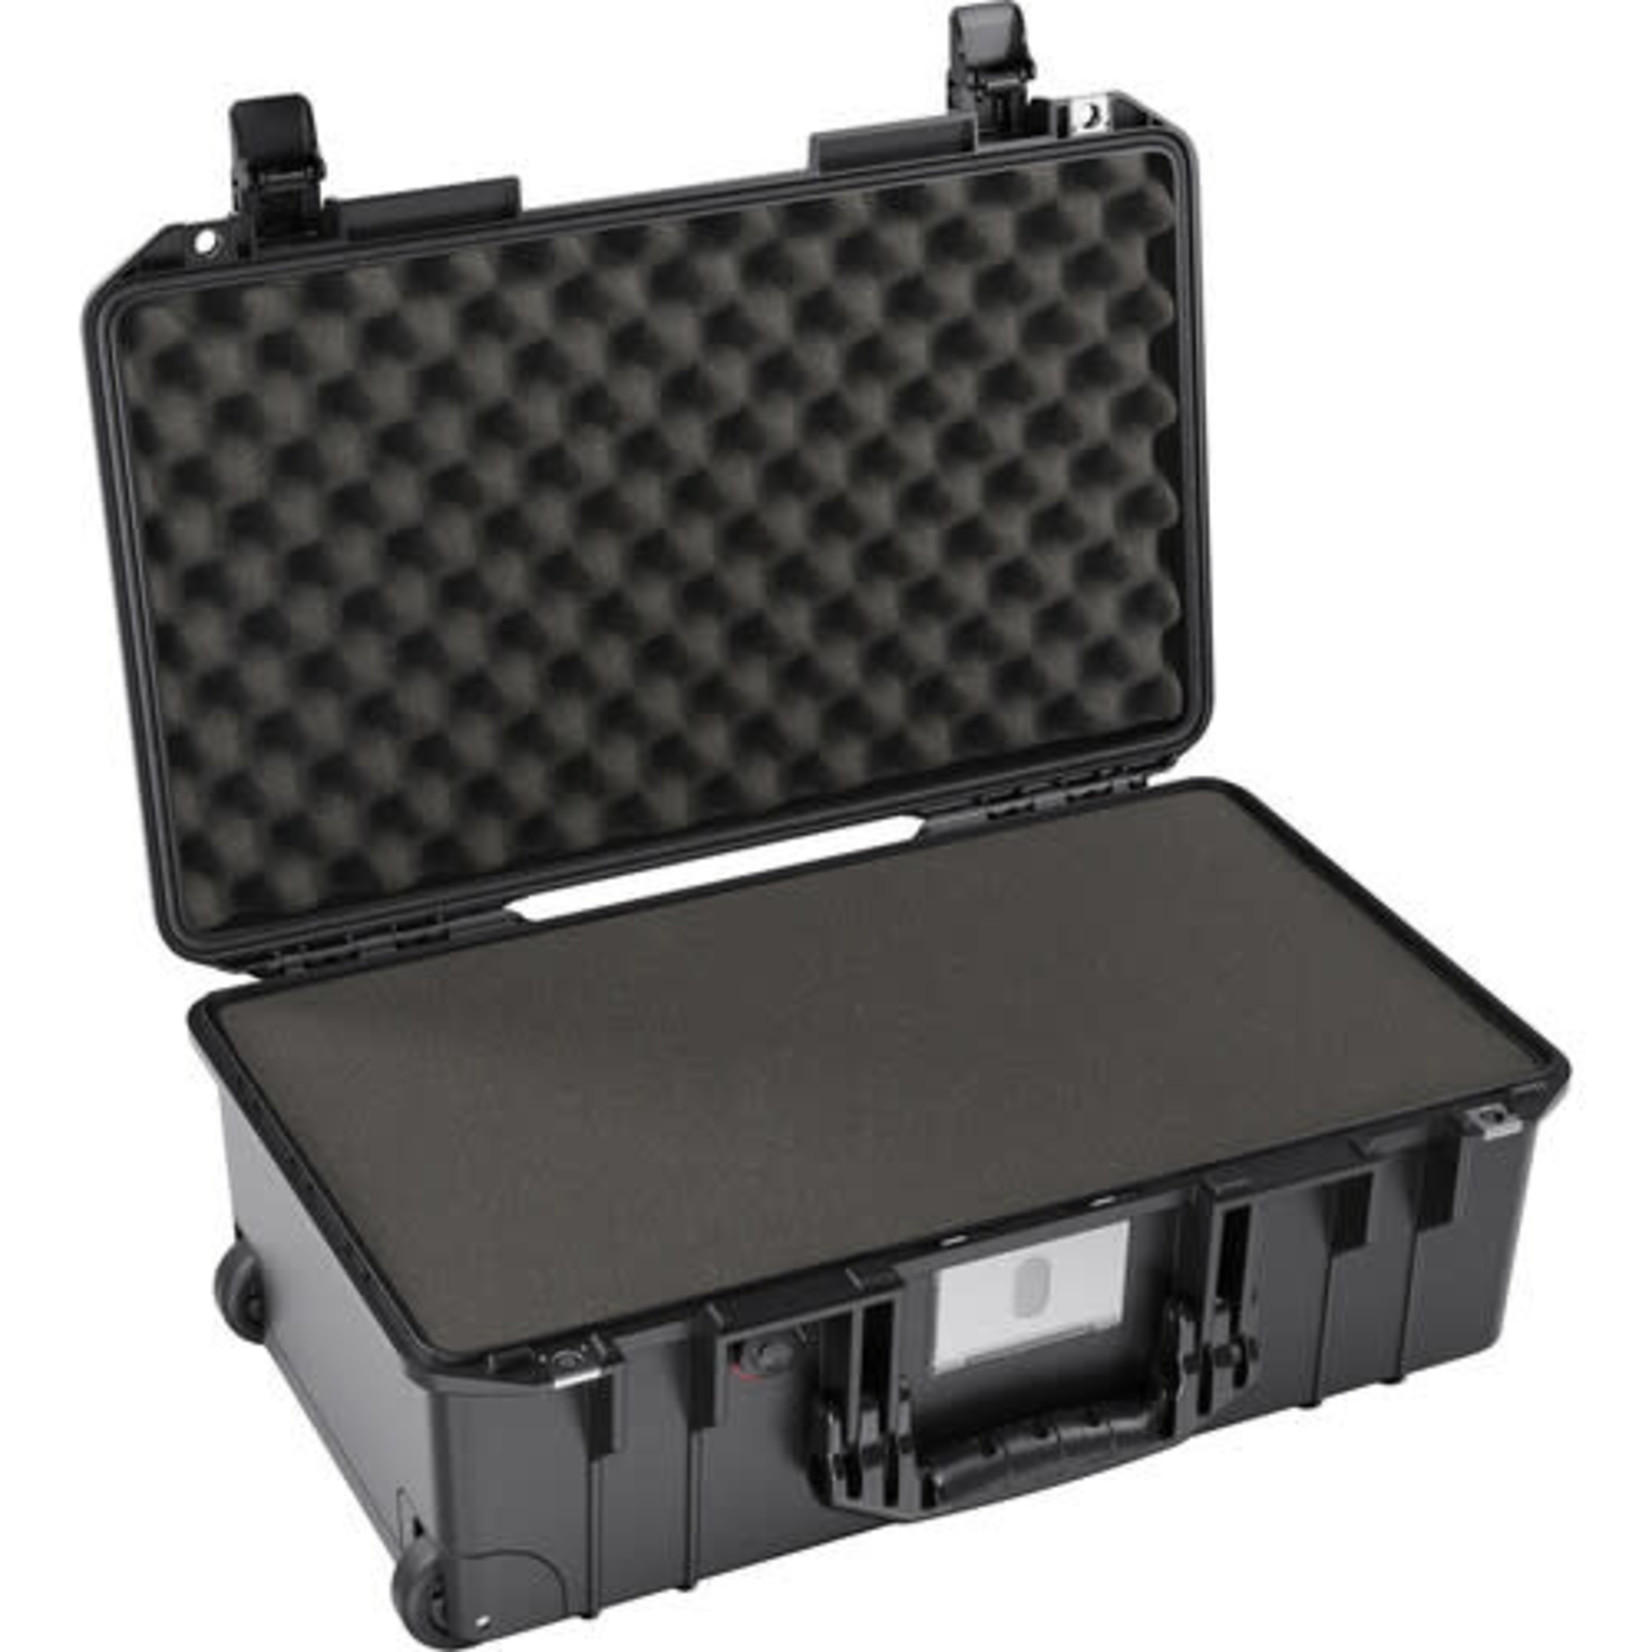 Pelican Pelican 1535AirWF Wheeled Carry-On Hard Case with Foam Insert (Black)